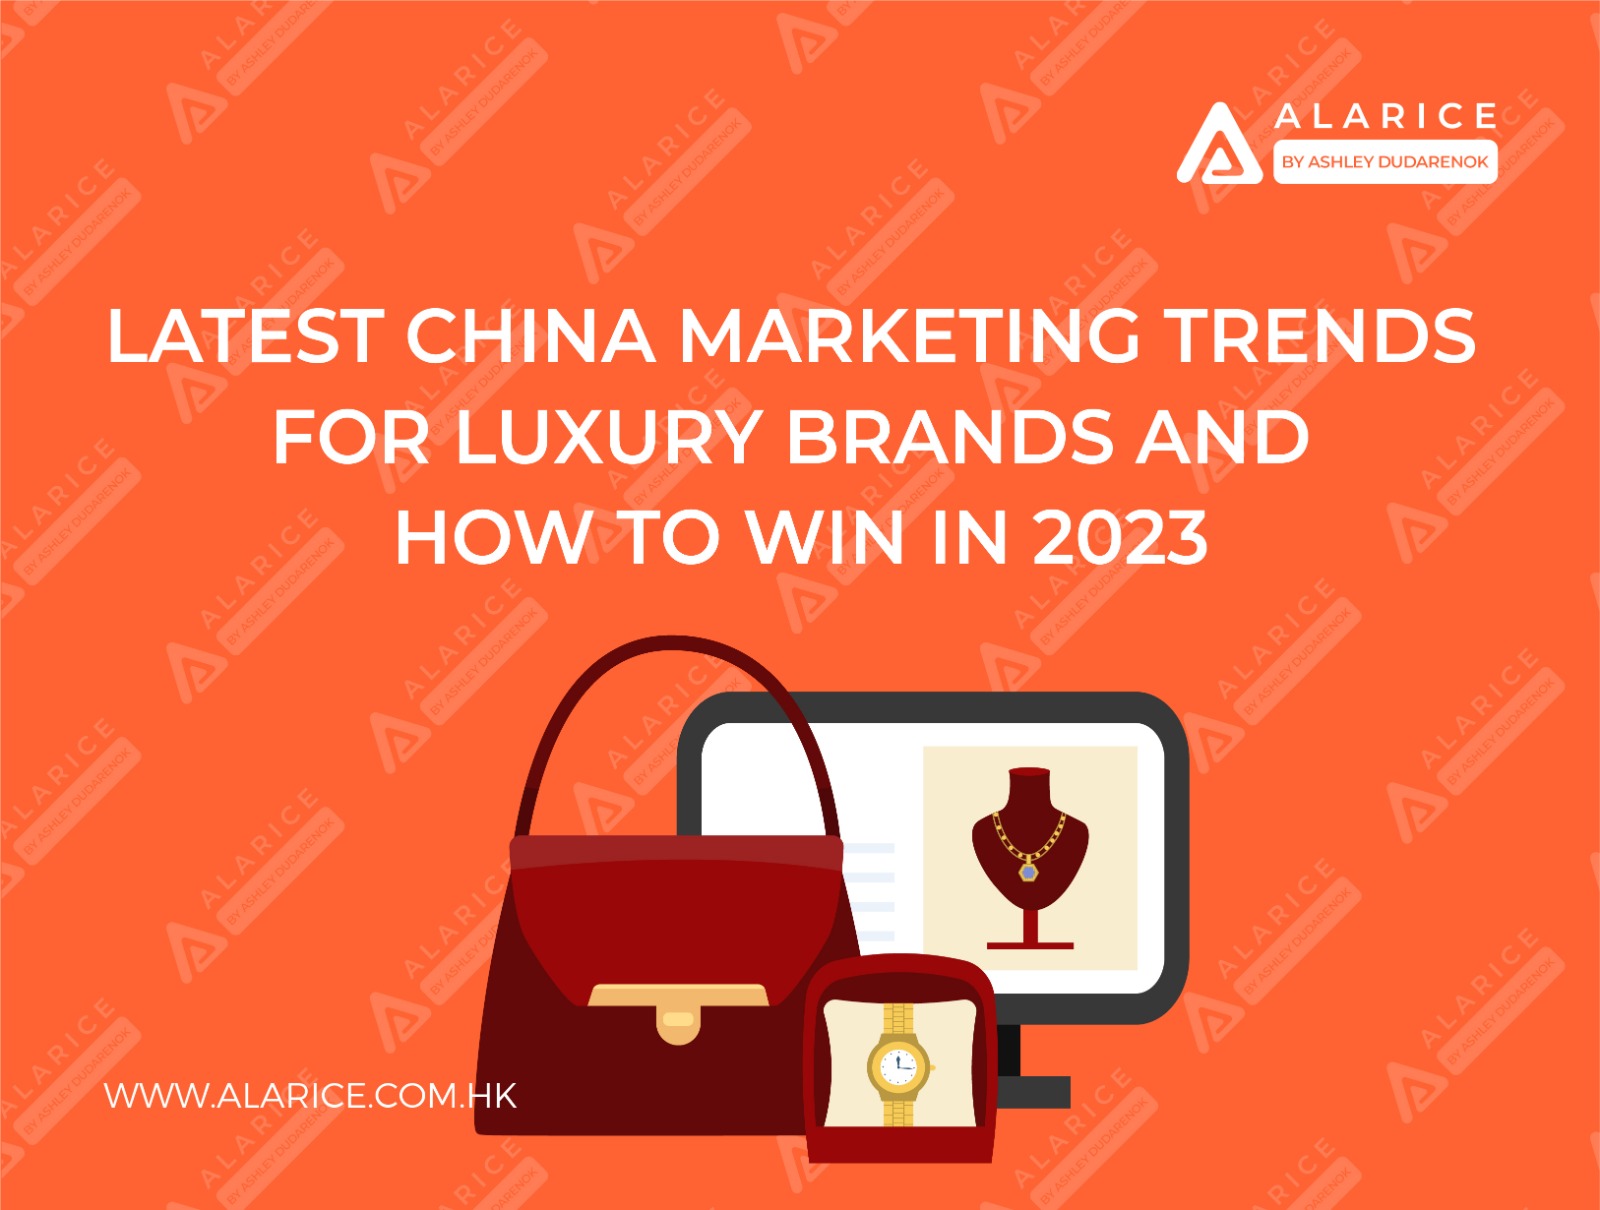 Louis Vuitton and Chanel dominate China's luxury social space, Media